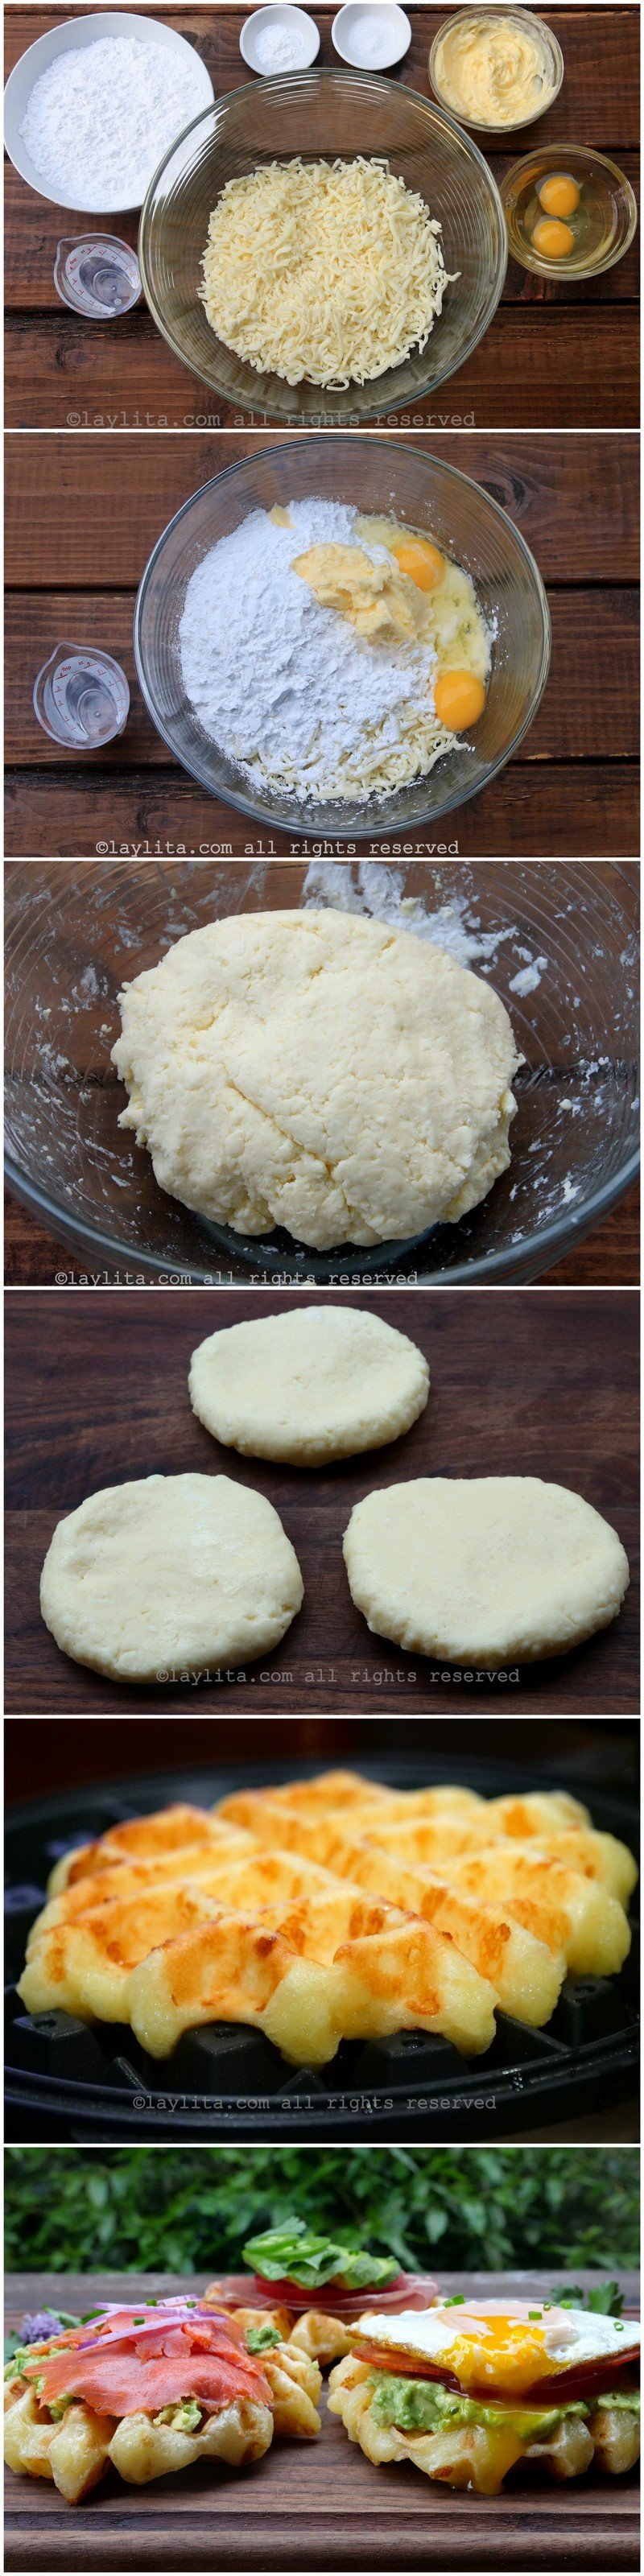 Step by step preparation for savory cassava cheese bread waffles